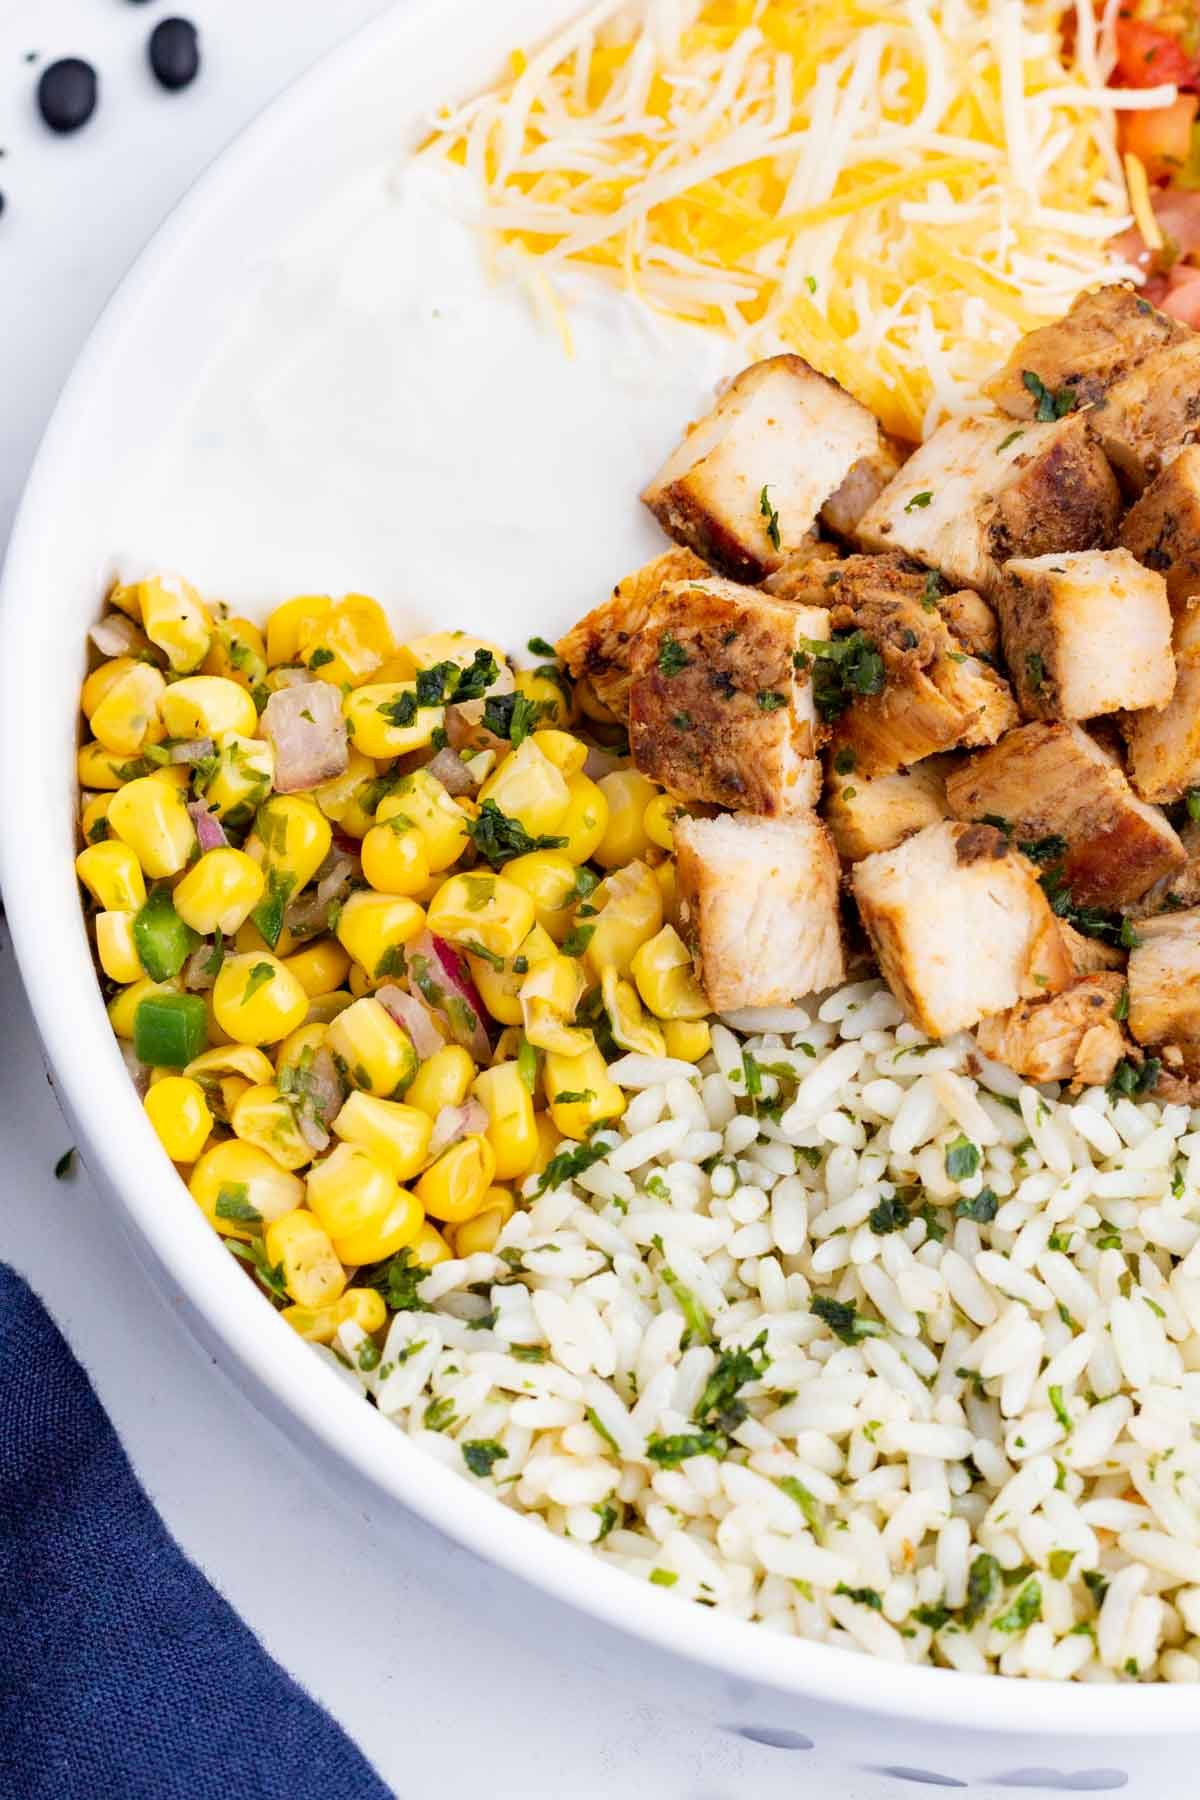 Corn salsa is piled into a burrito bowl with chicken, rice, and cheese.